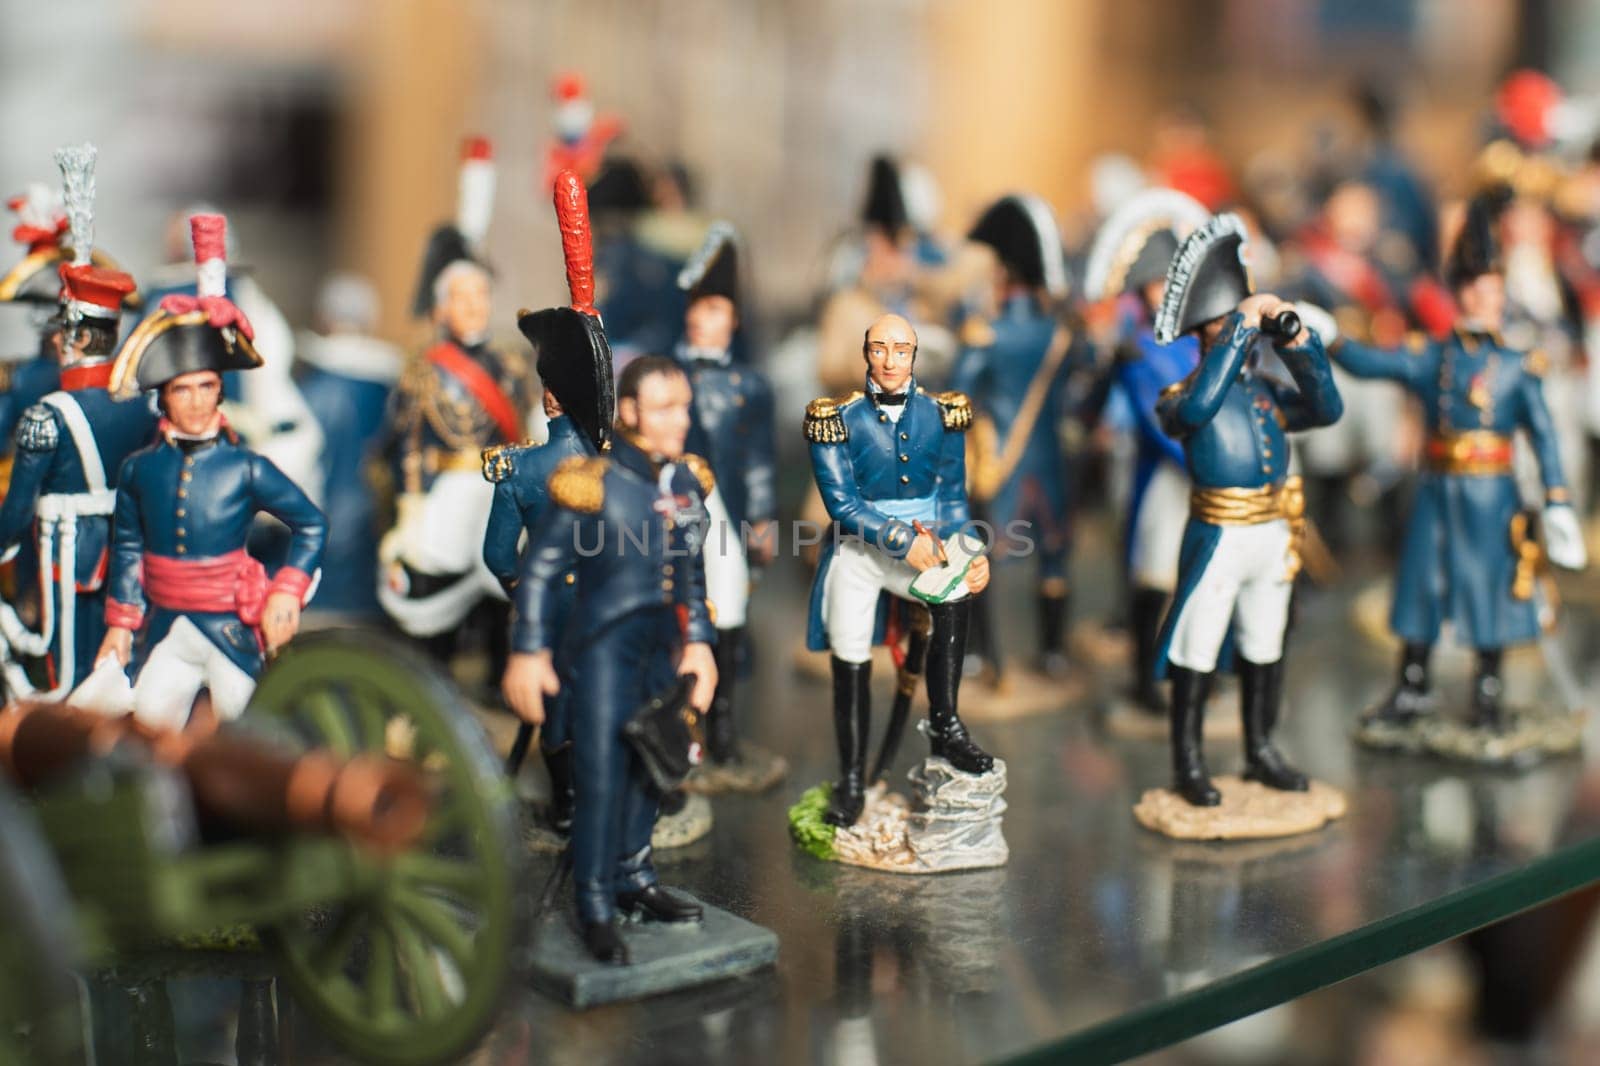 Tin soldiers in uniform in a vintage store France